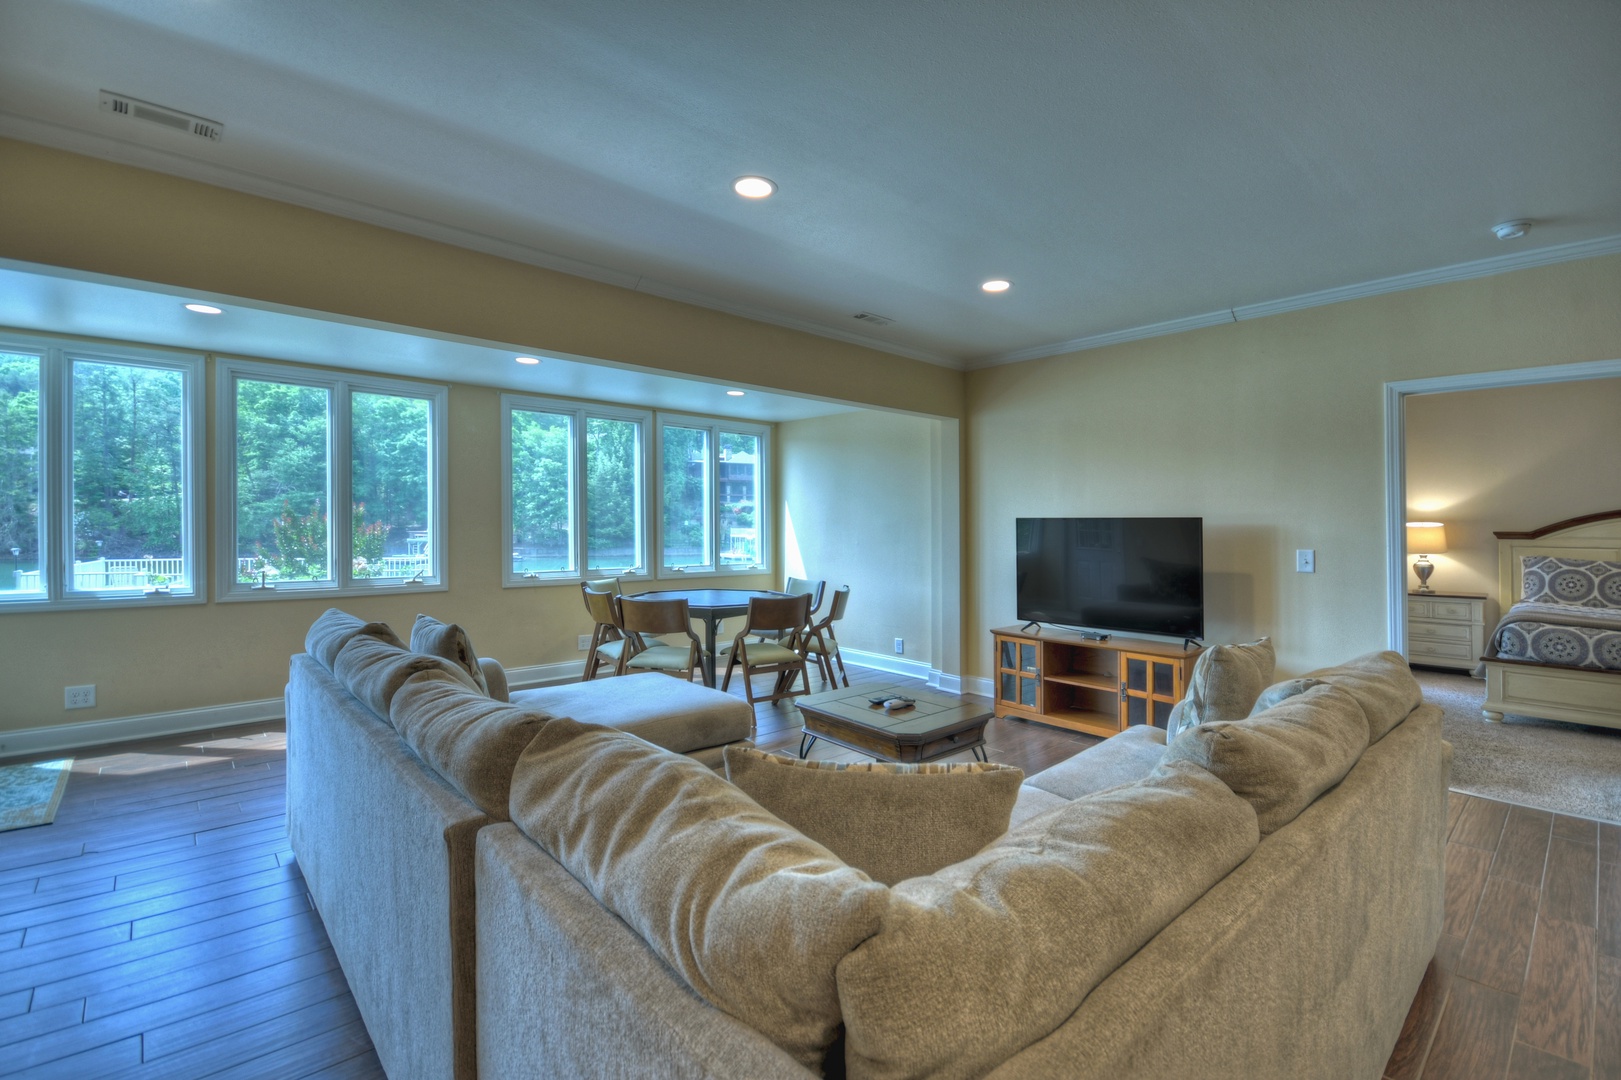 Jump Right In- Main level living room with a TV and seating area